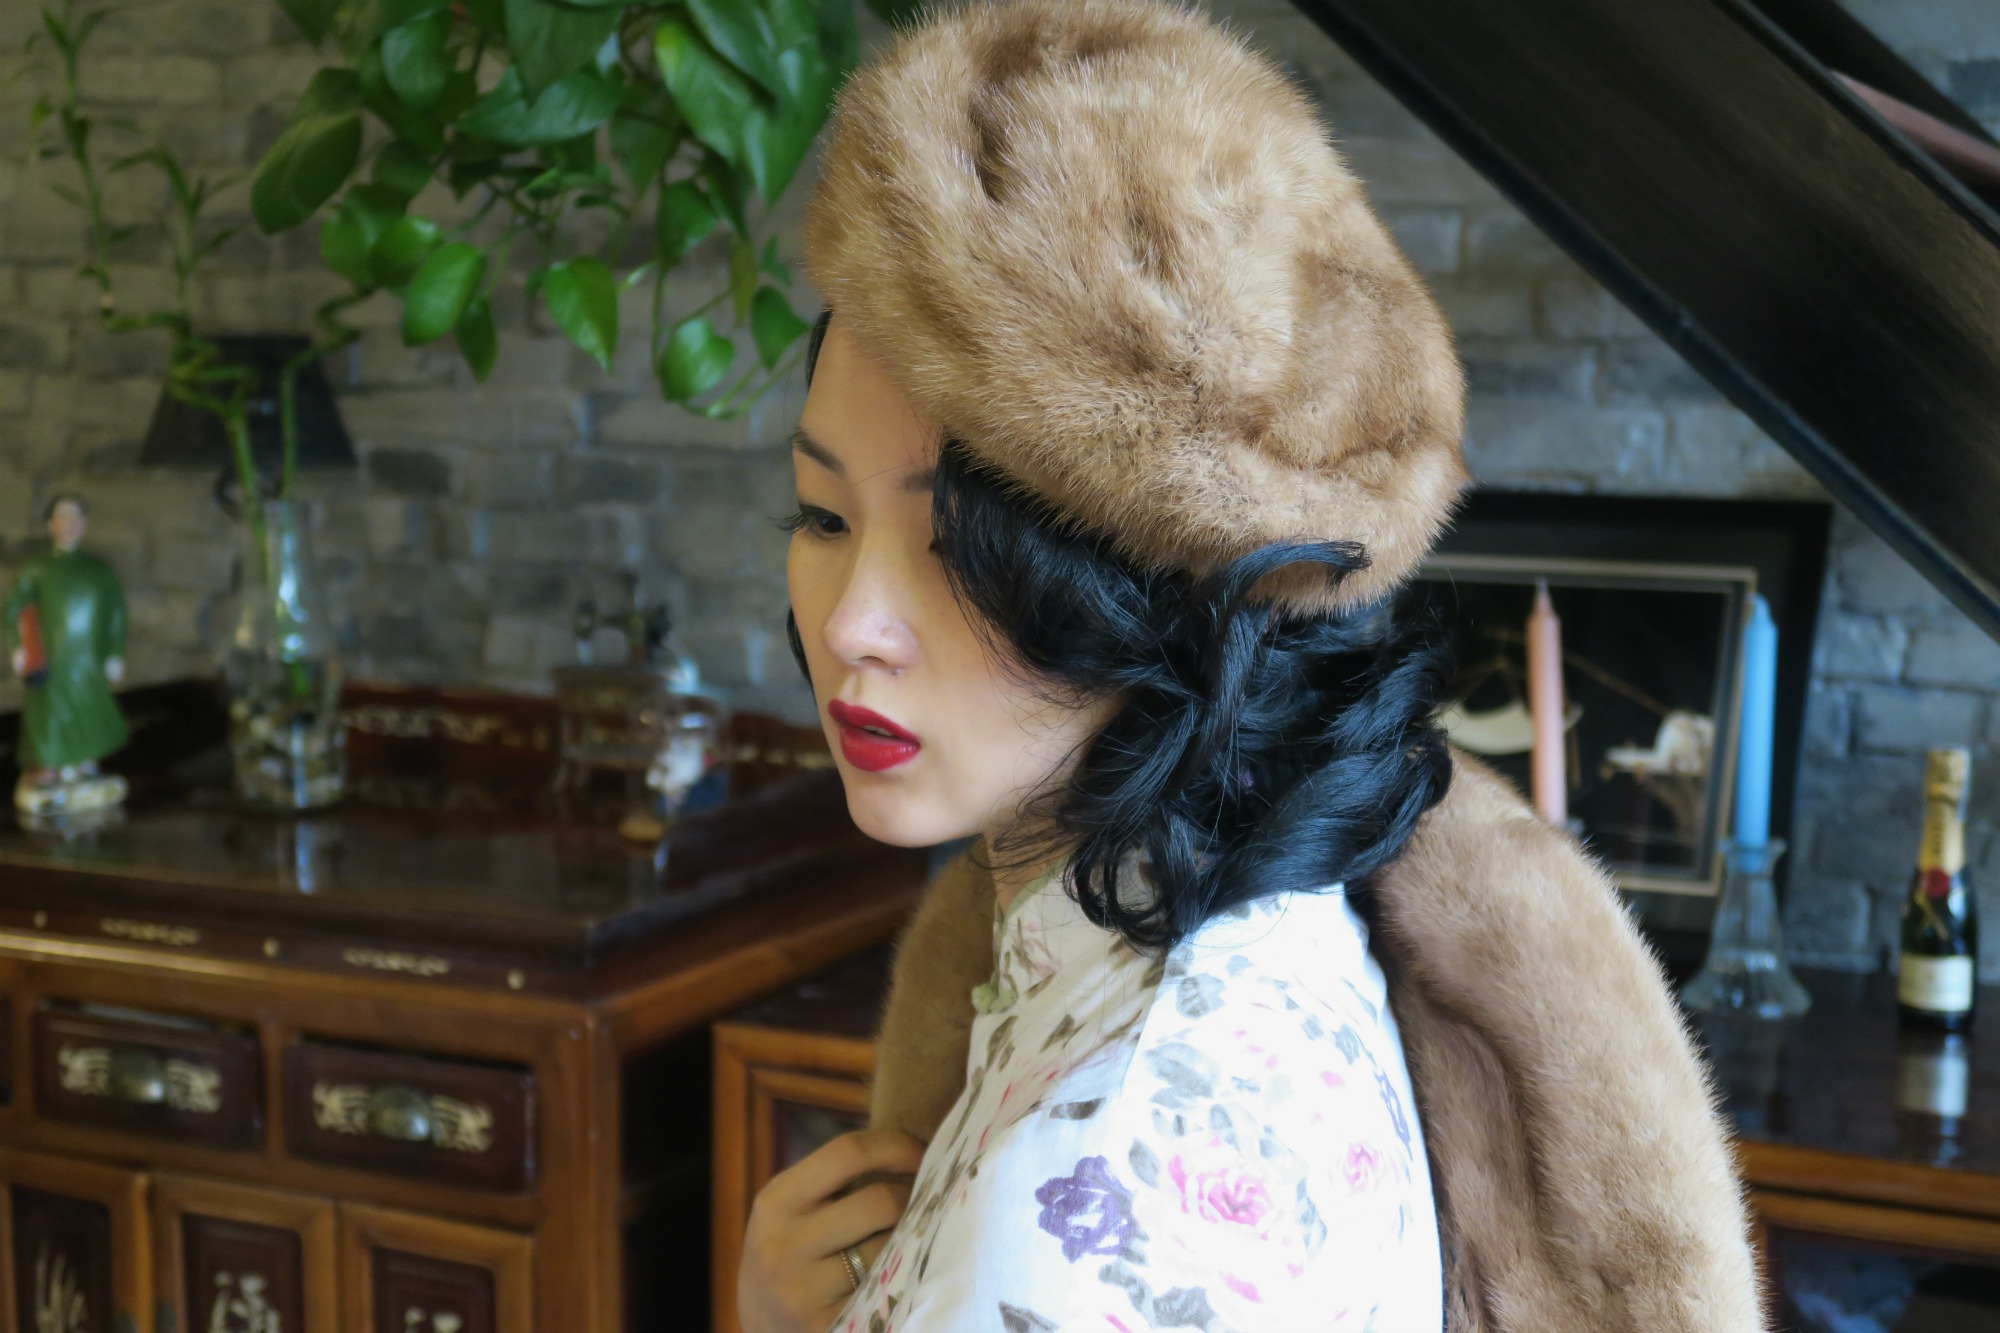 Wearing a qipao with vintage fur jacket and hat off shoulder view